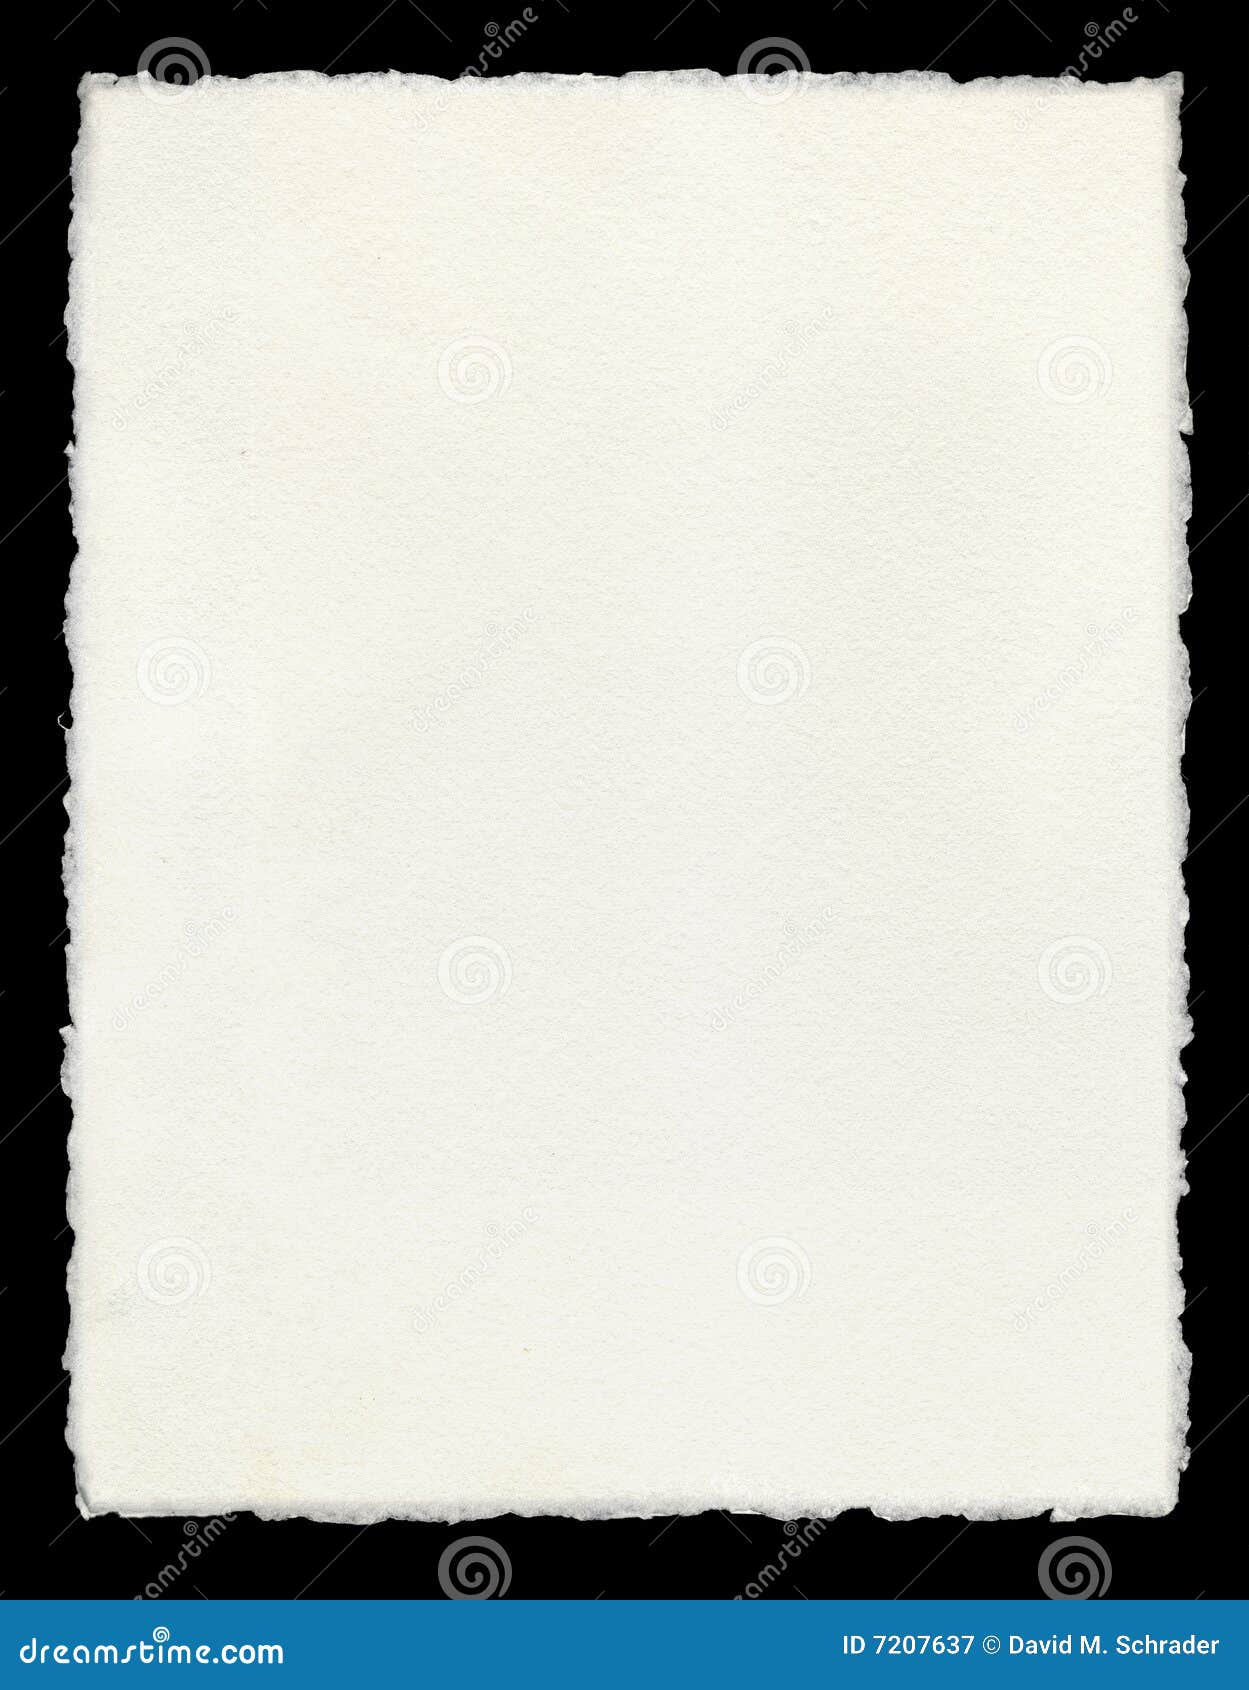 Deckle Edged Paper stock image. Image of fashioned, creased - 7207637